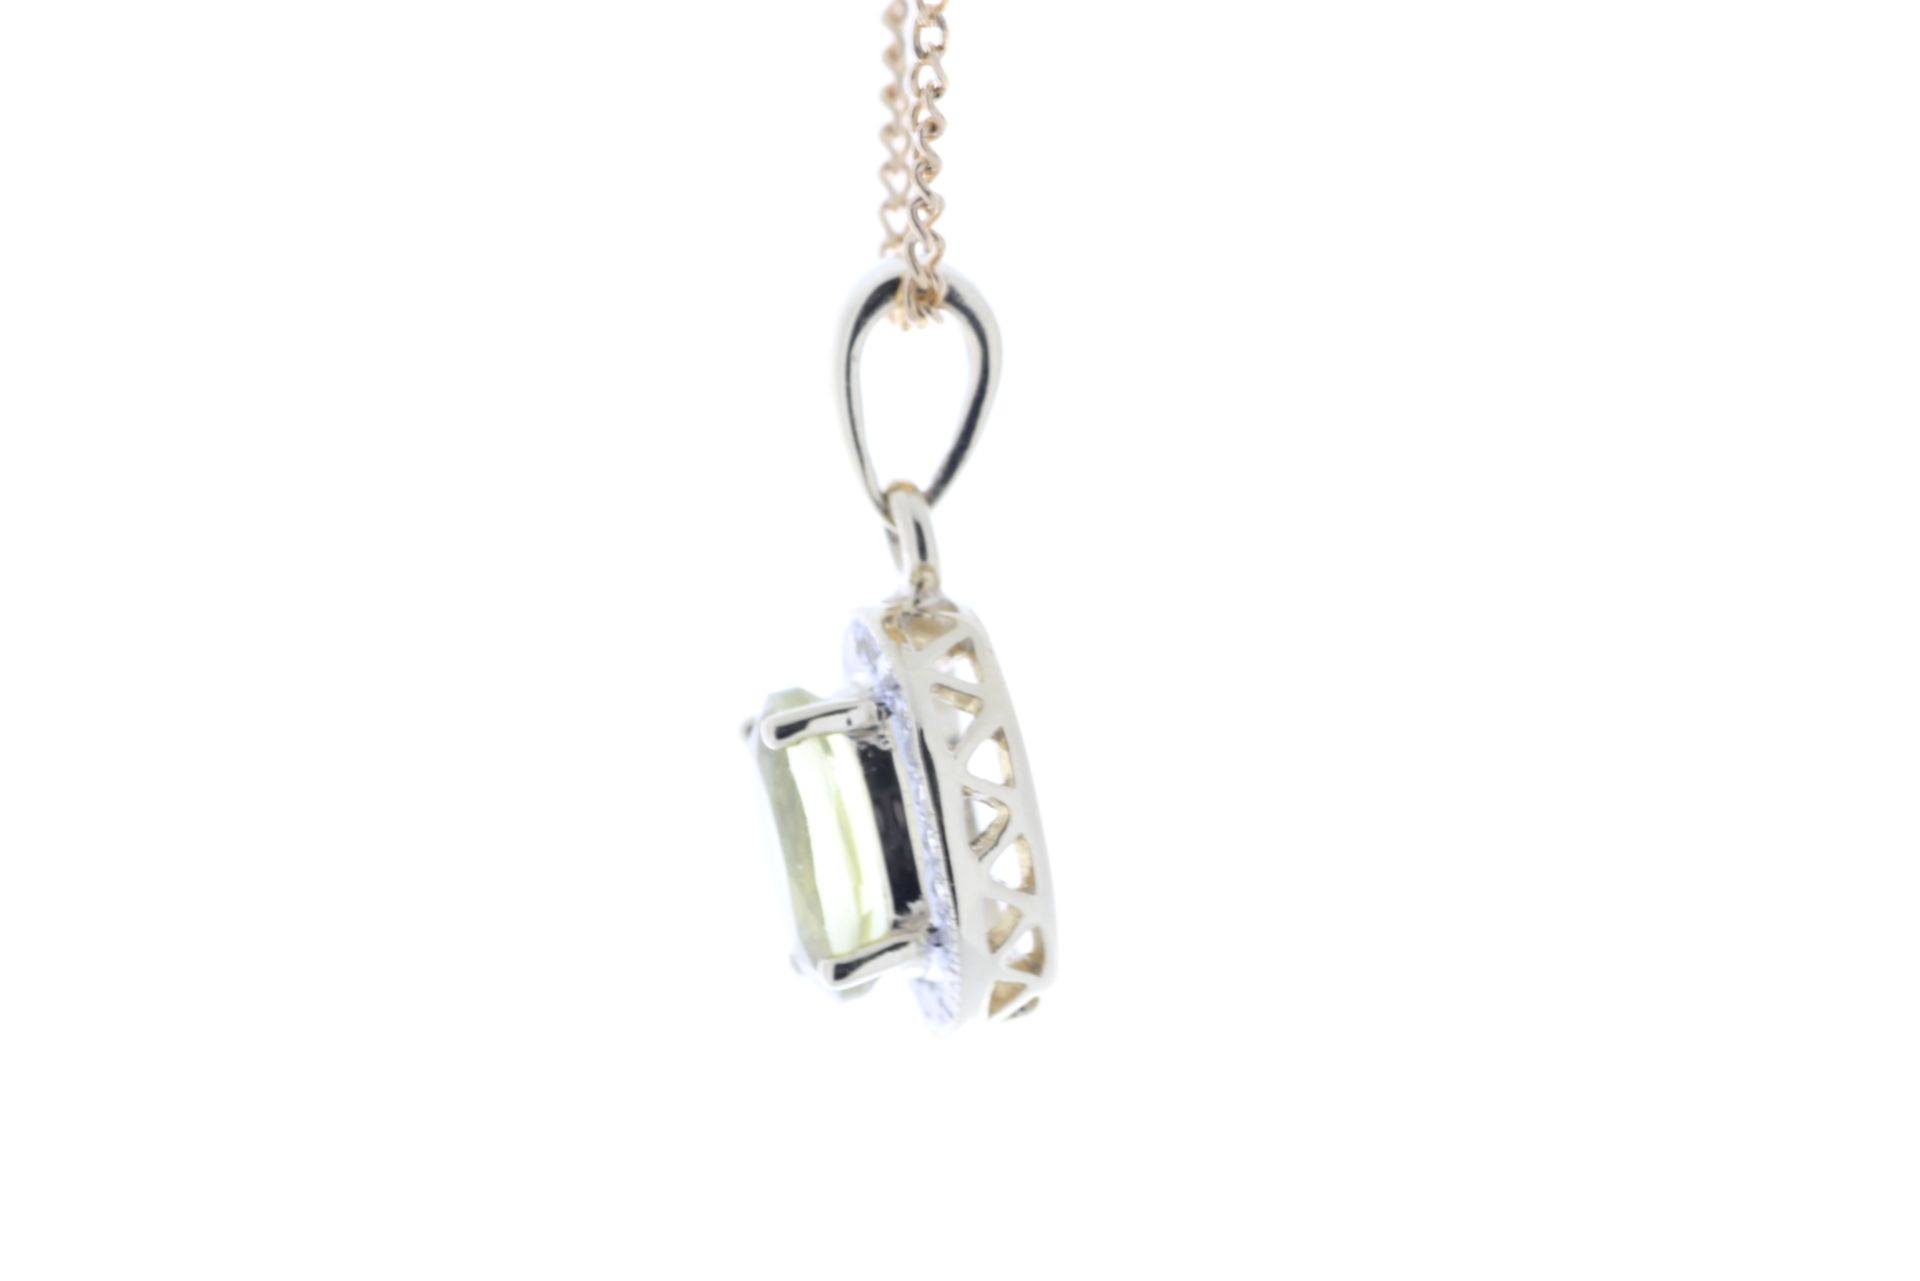 9ct Yellow Gold Diamond And Lemon Quartz Pendant 0.11 Carats - Valued by GIE £1,445.00 - This is a - Image 4 of 5